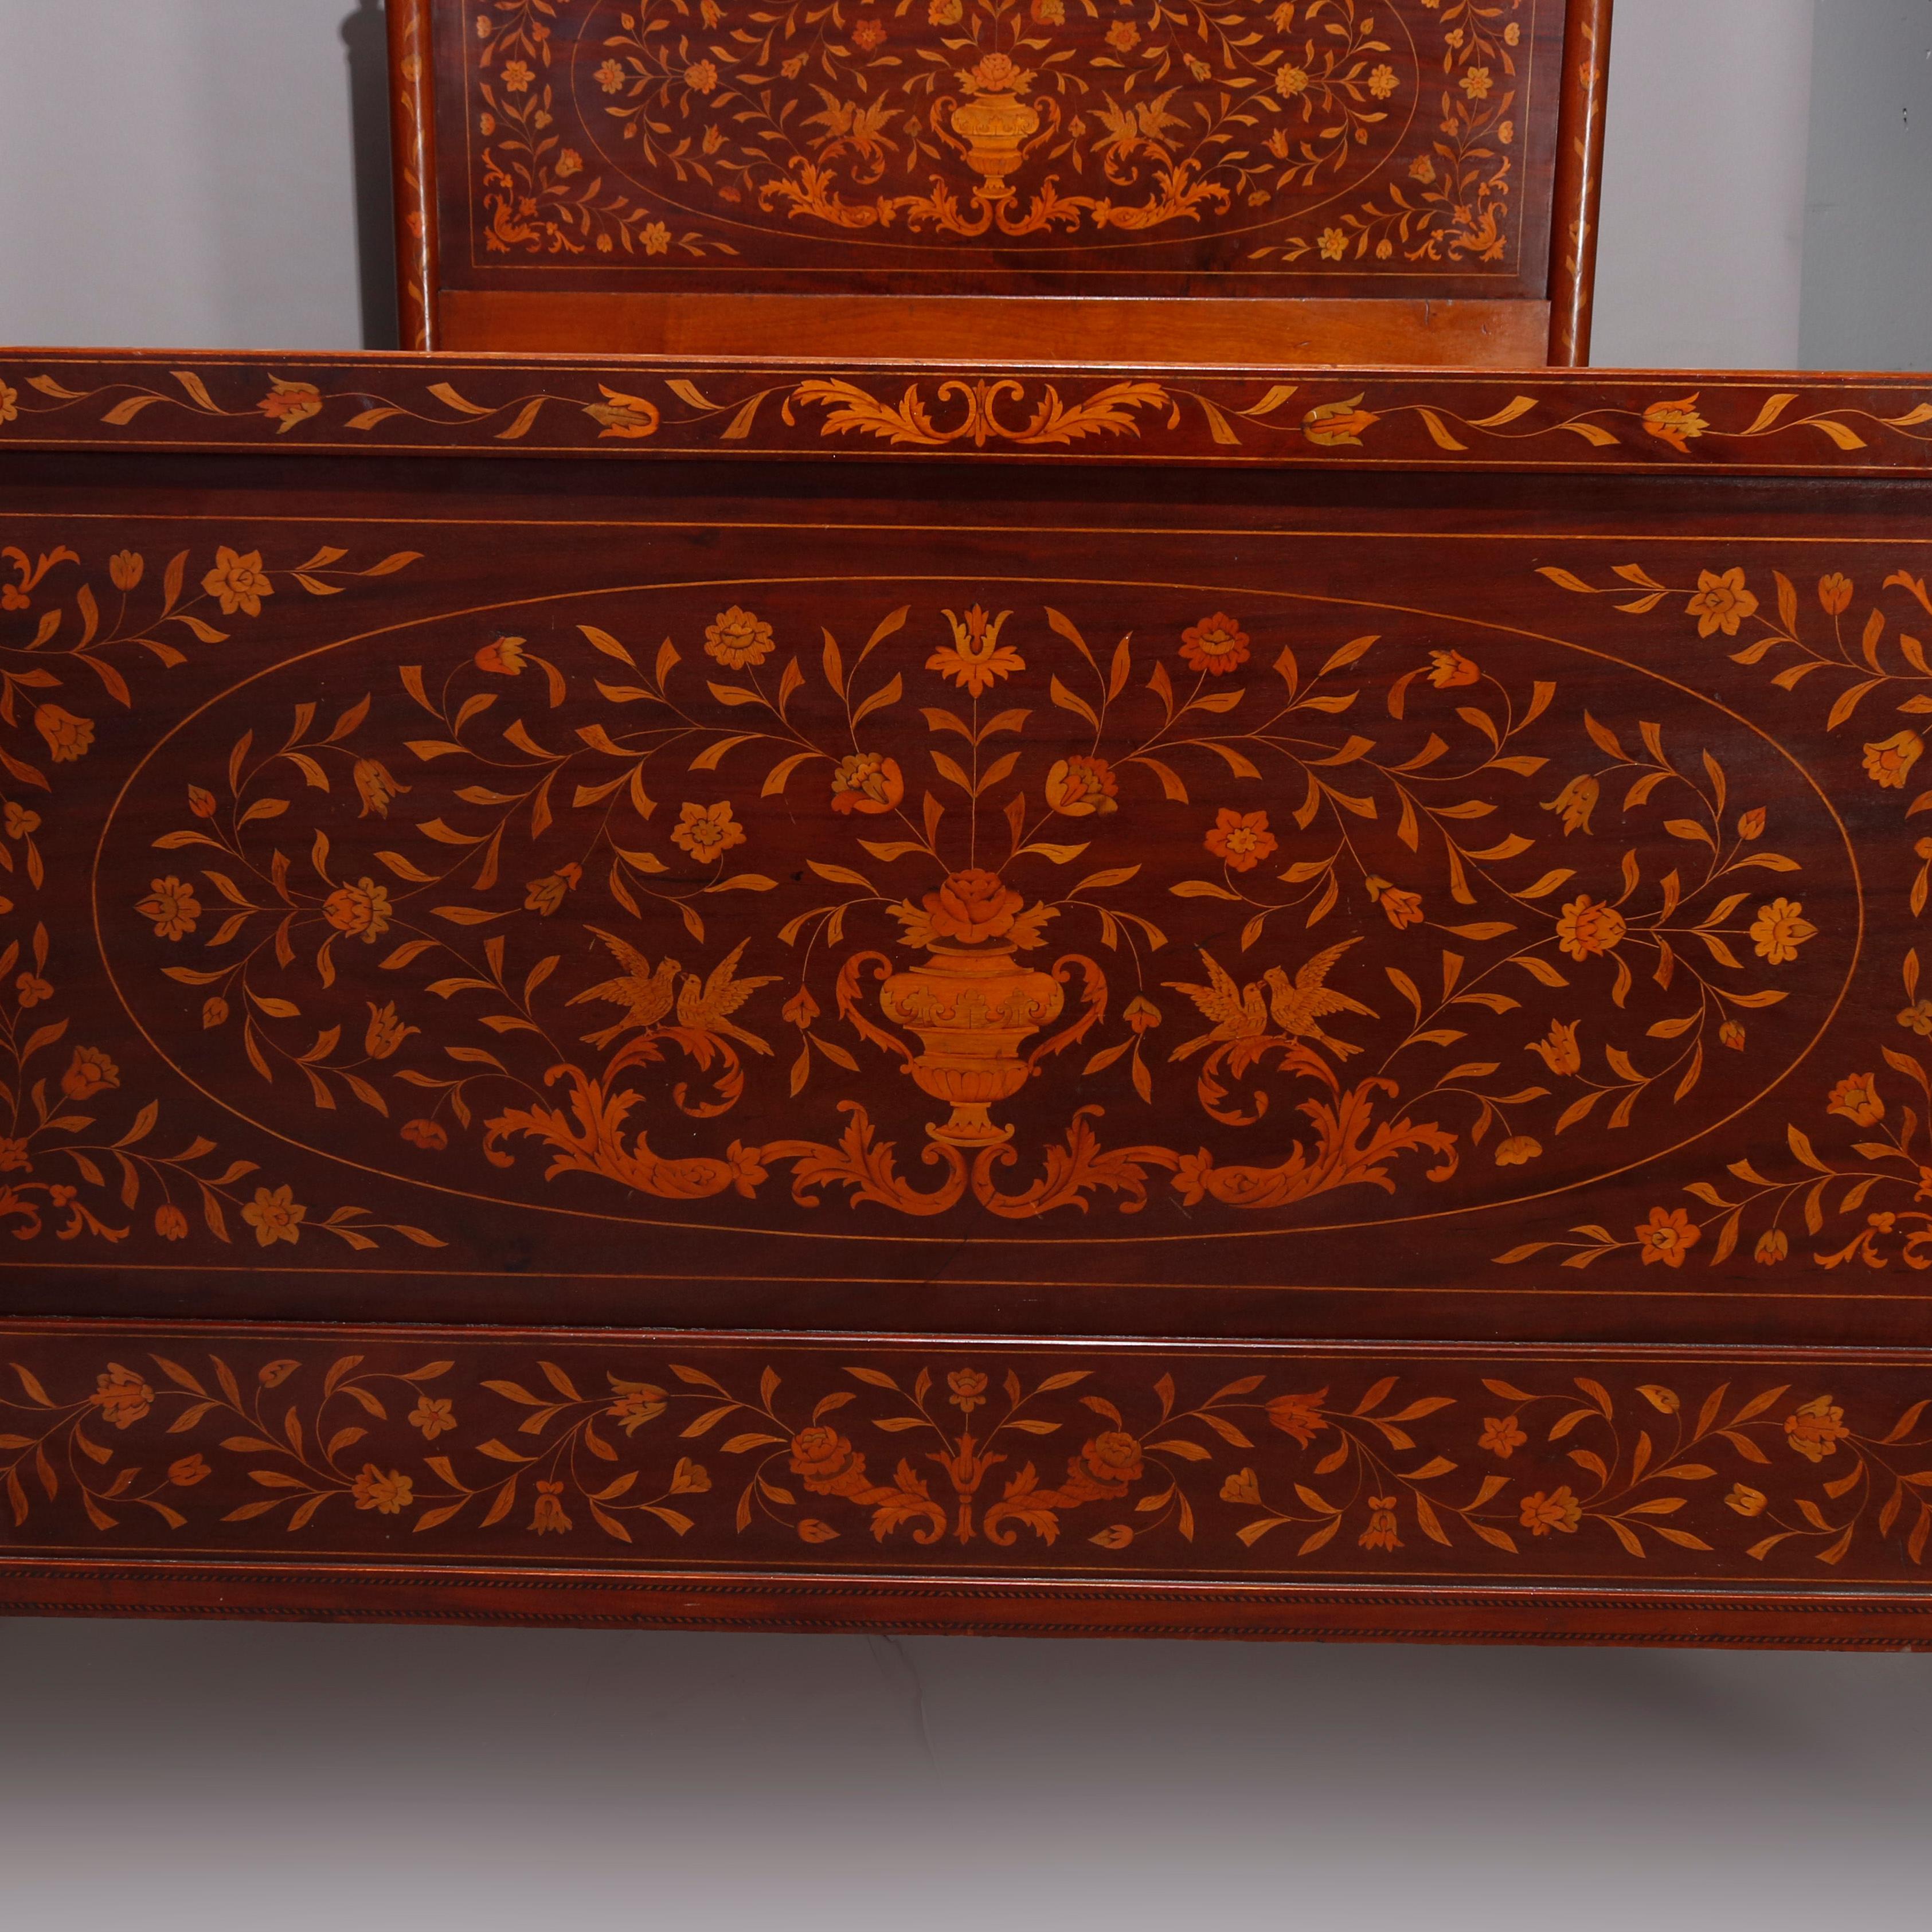 European Antique Dutch Marquetry Mahogany Full Size Bed with Floral Urn Satinwood Inlay